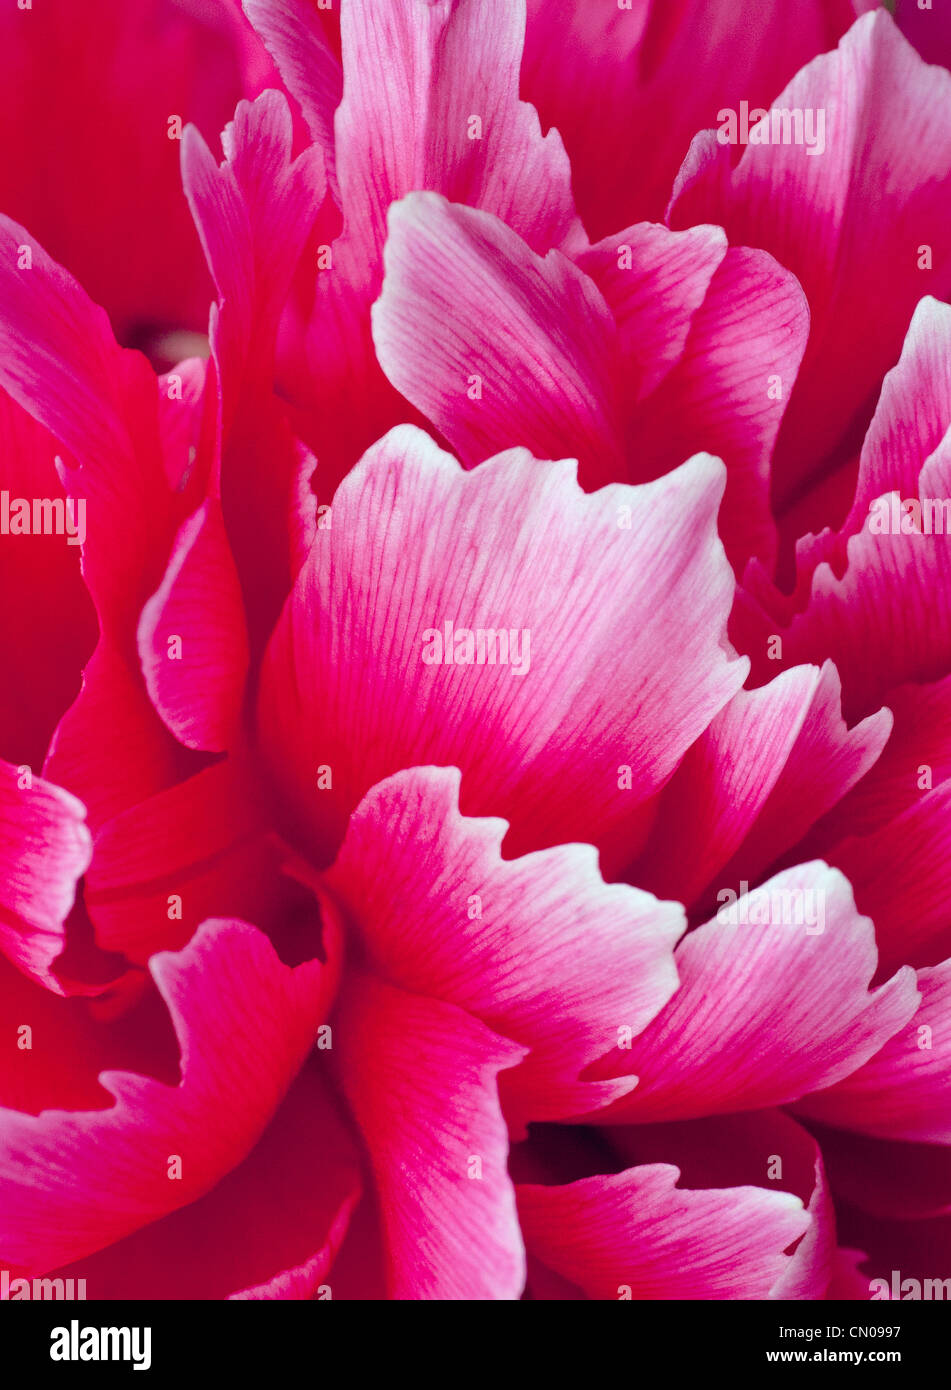 Macro photograph of beautiful pattern of peony petals, with strong design element in the flowing petals Stock Photo